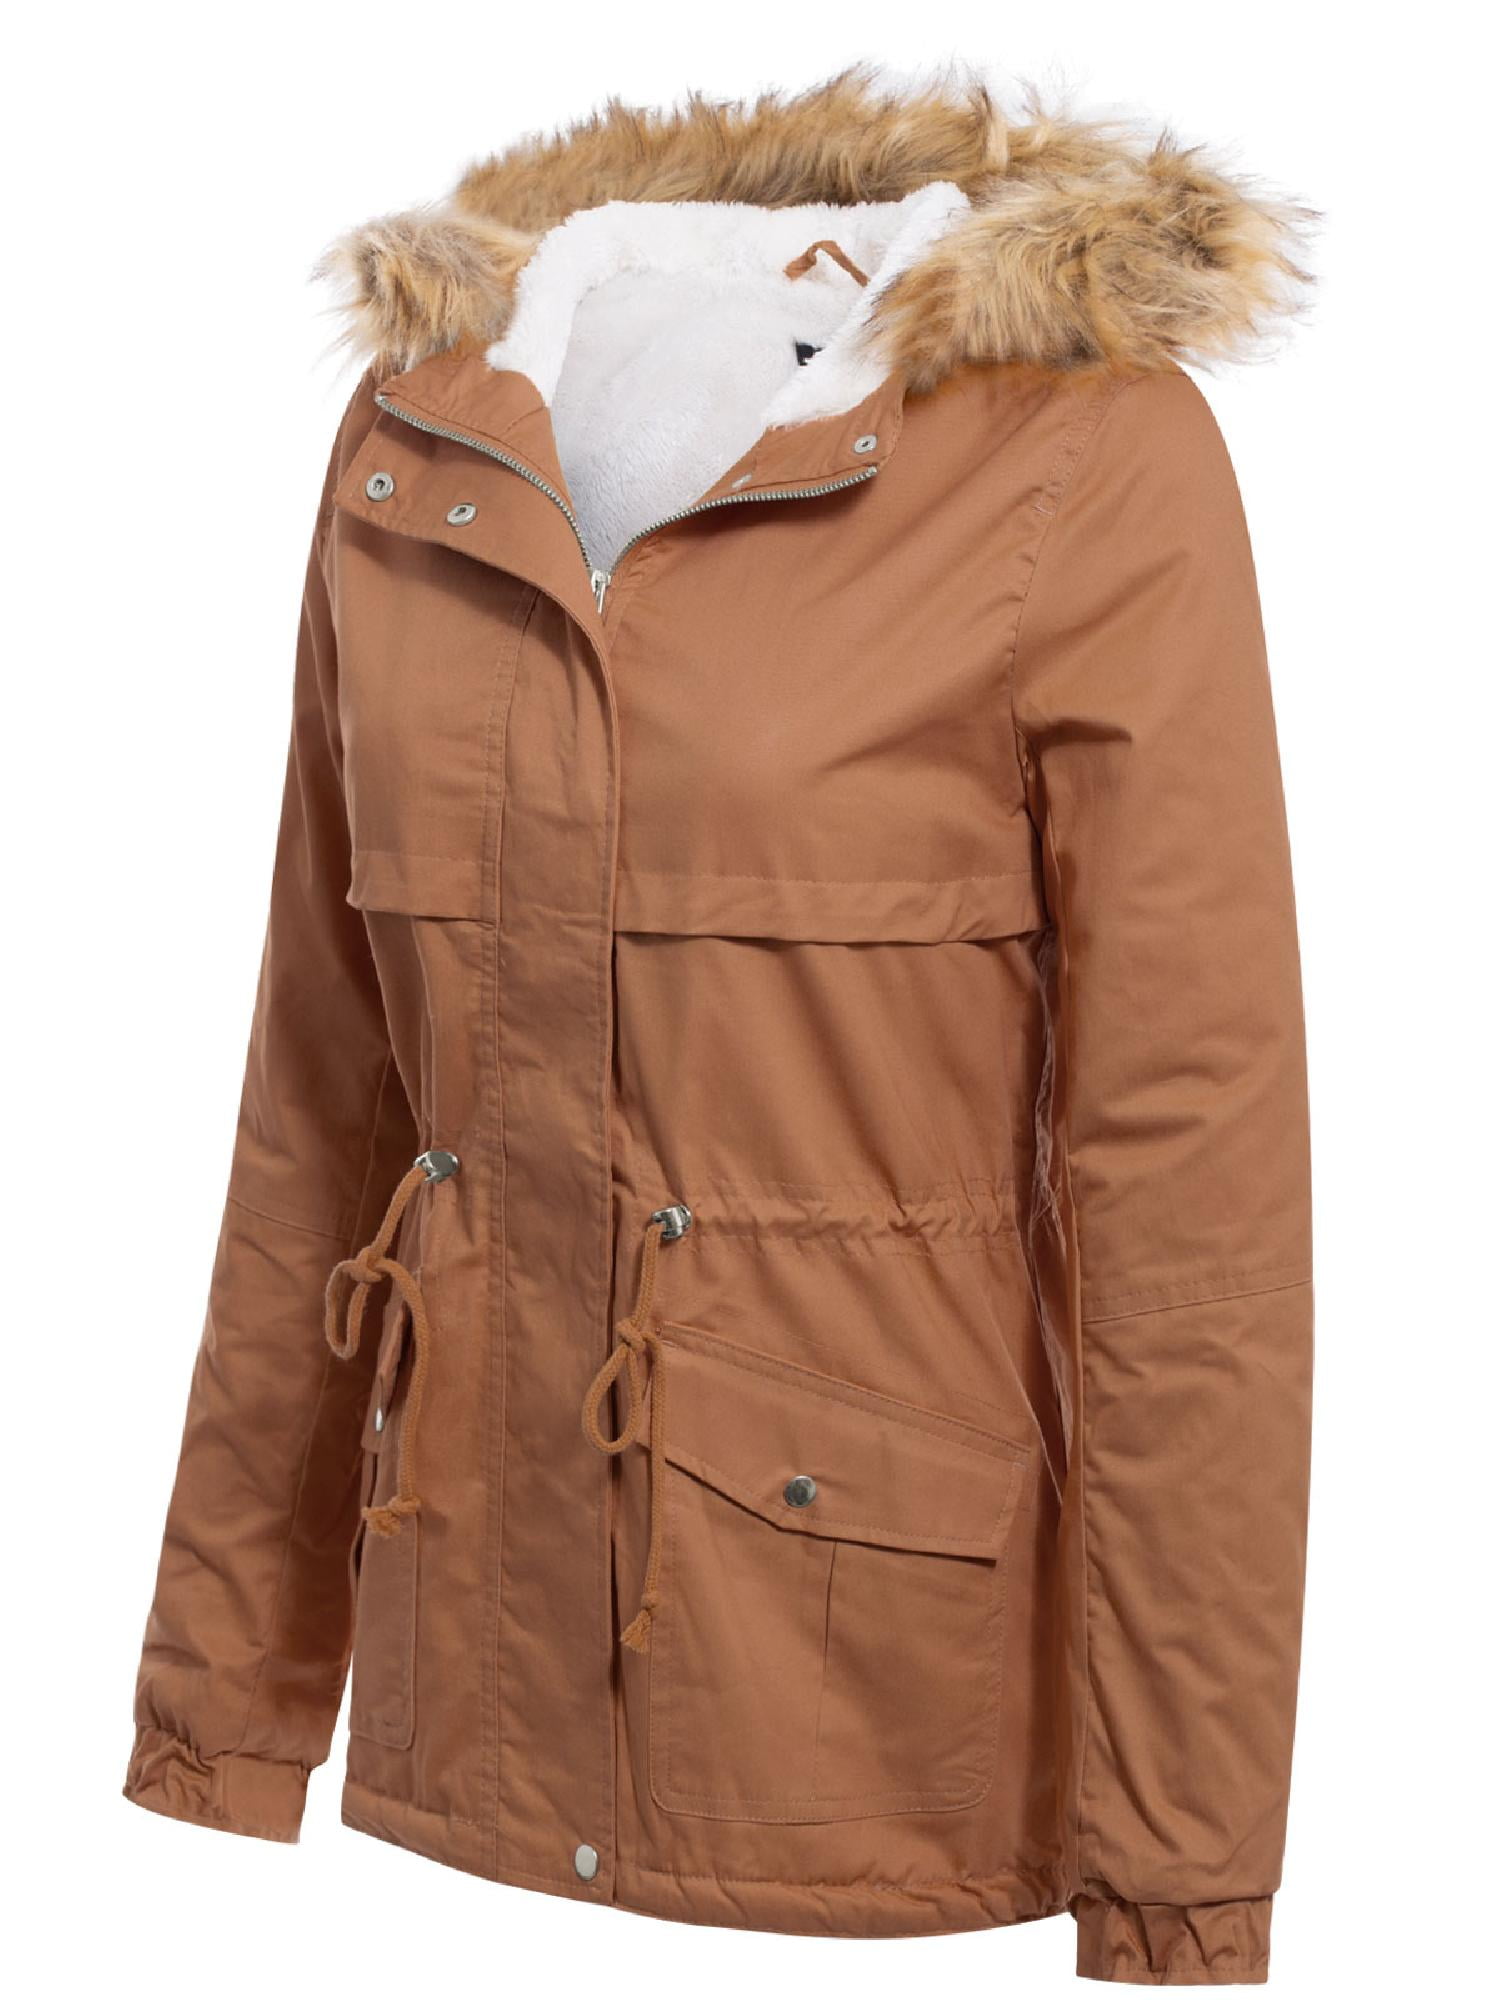 Made by Olivia Women's Junior Fit Faux Fur Lining Warm Casual Military Anorak Safari Hoodie Jacket